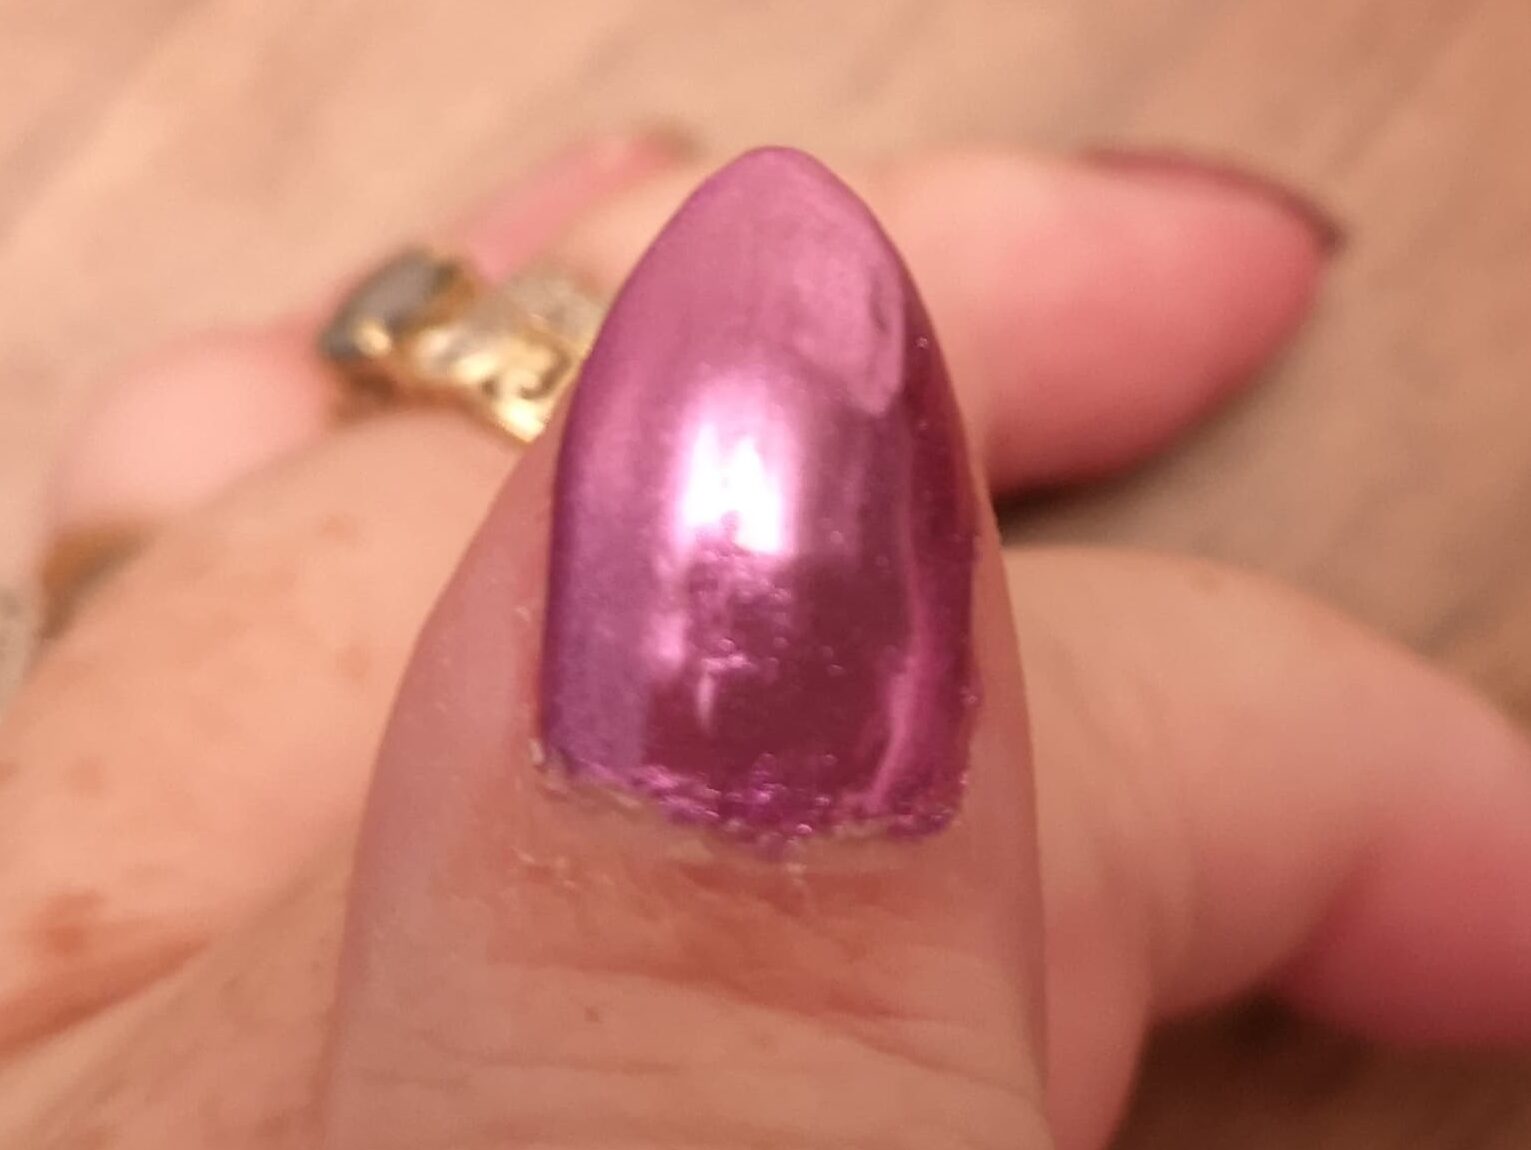 Fingernail with metallic nail powder collected at the cuticle. Sistaco Nail Set - The Solution For People With Dexterity Issues?  I Put It To The Test!